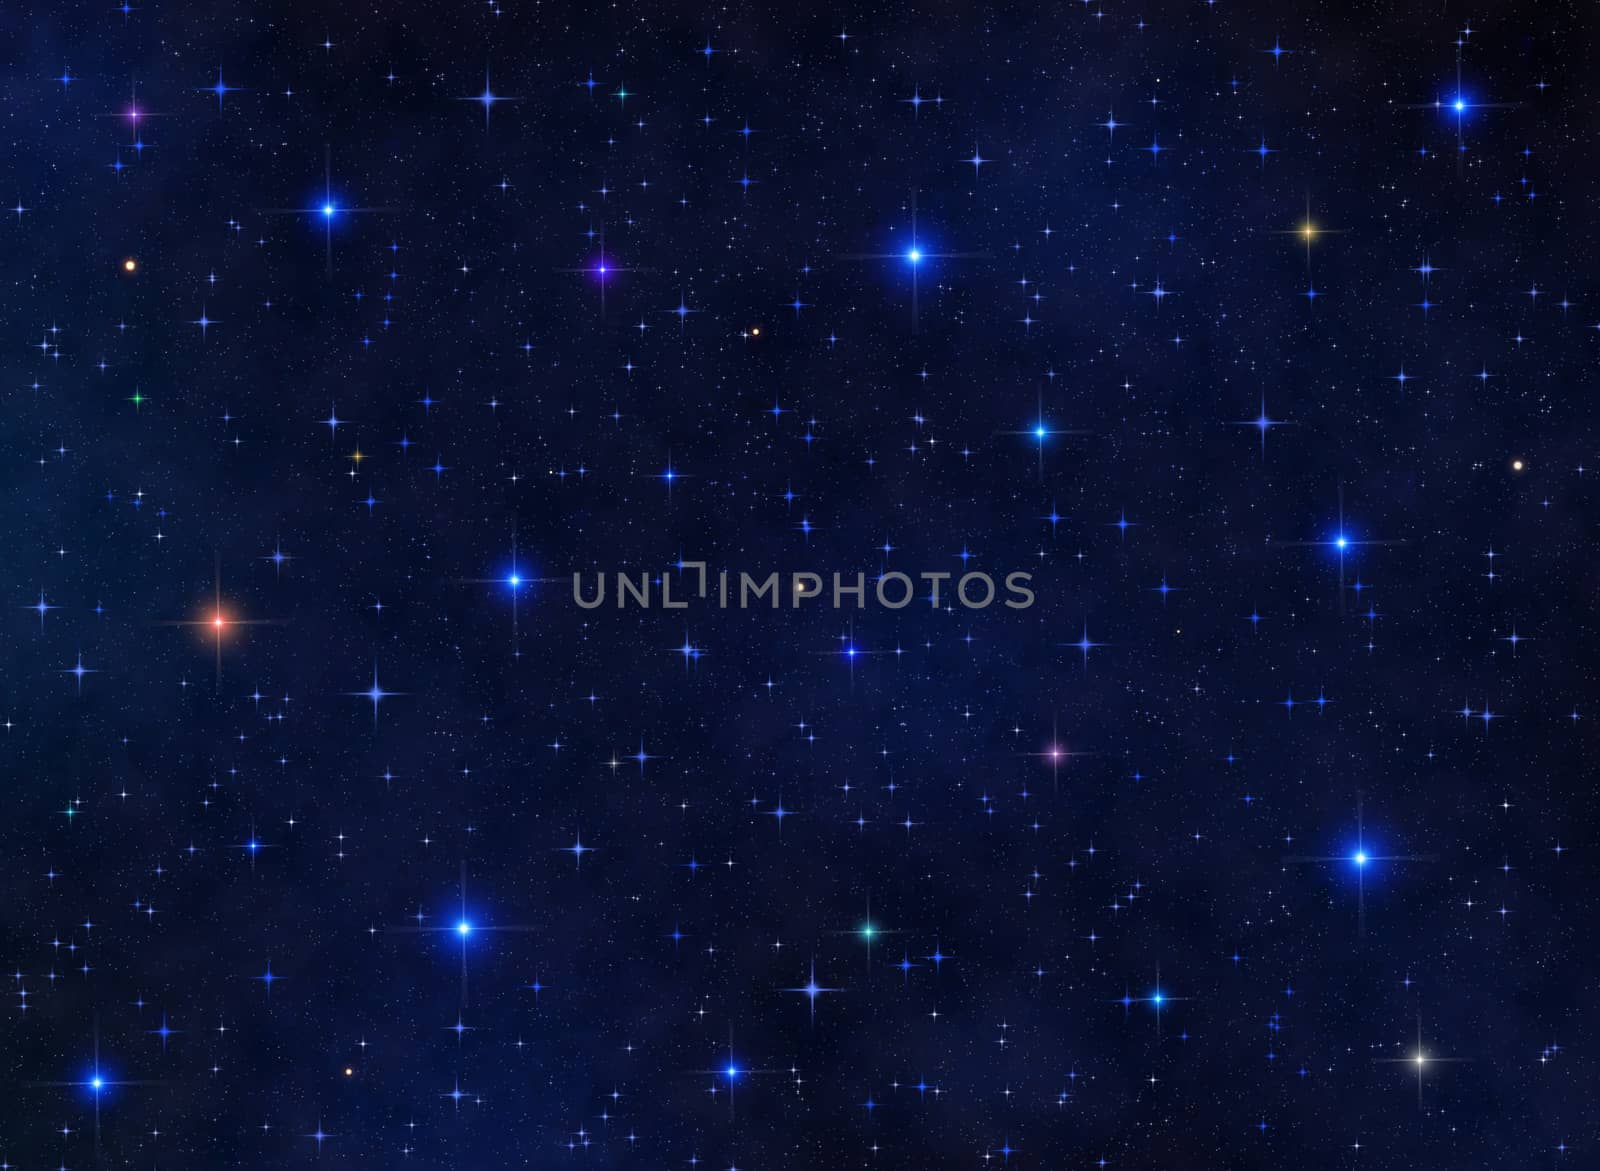 Detailed illustration of universe view. Made in image editor from scratch. Stars, planets, nebulas, constellations and clusters are presented.